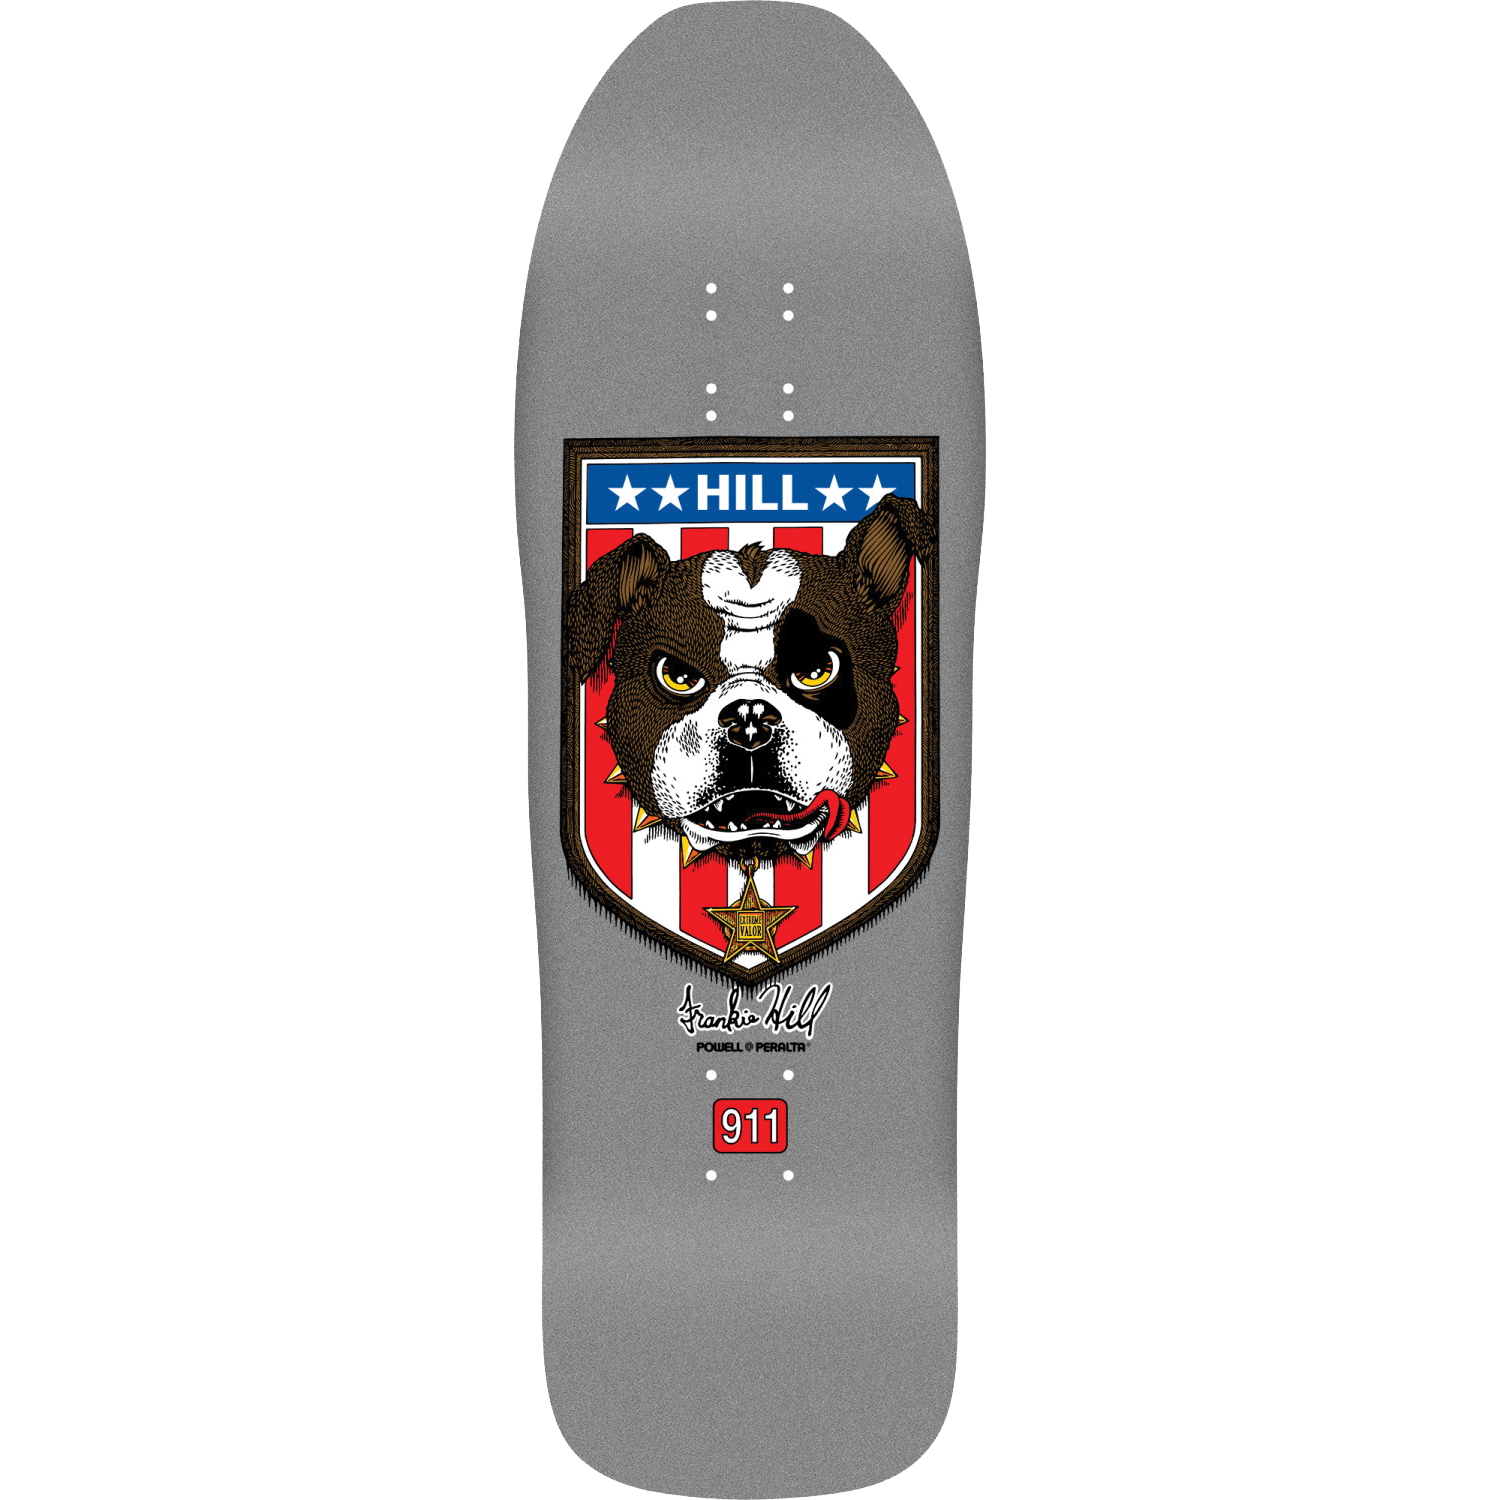 Powell Frankie Hill Re-Issue Skateboard Deck - 10.0" - Gray - Invisible Board Shop